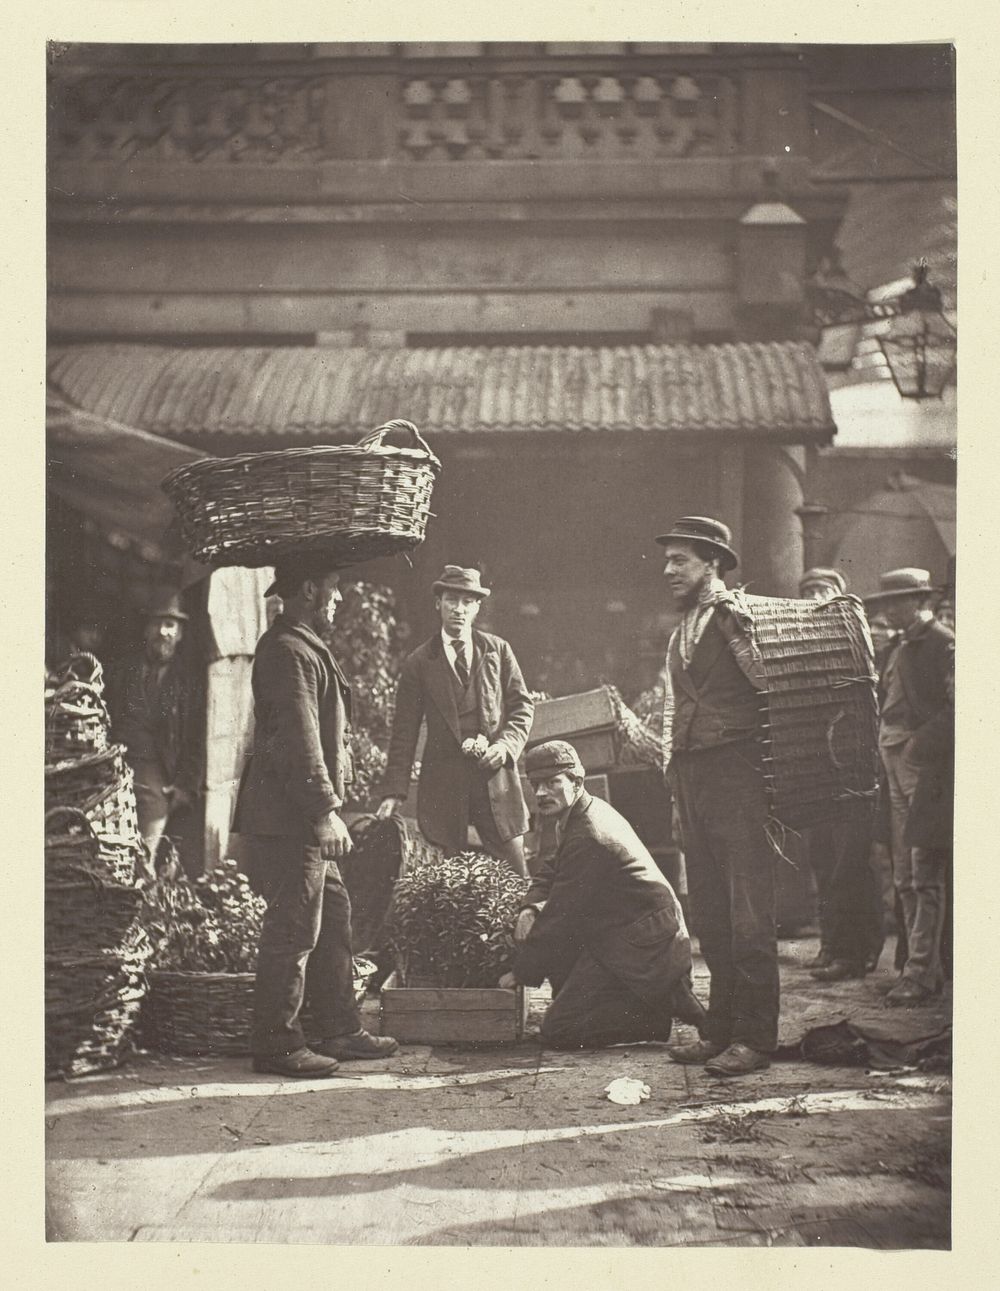 Covent Garden Labourers by John Thomson (Photographer)